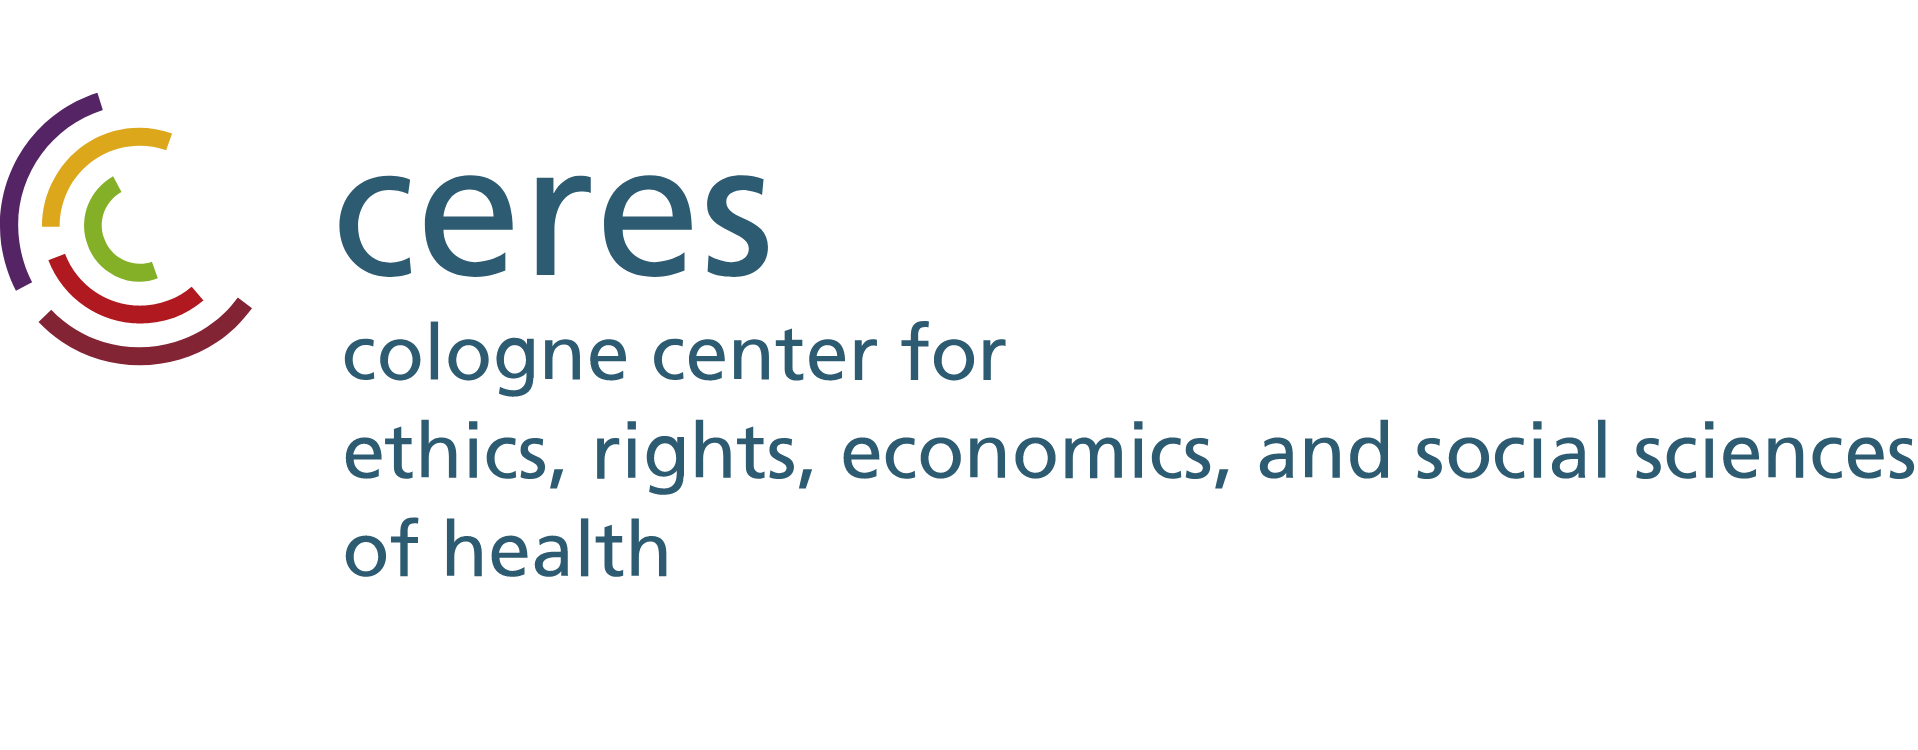 Logo "Ceres" (Cologne Center for Ethics, Rights, Economics and Social Sciences of Health)